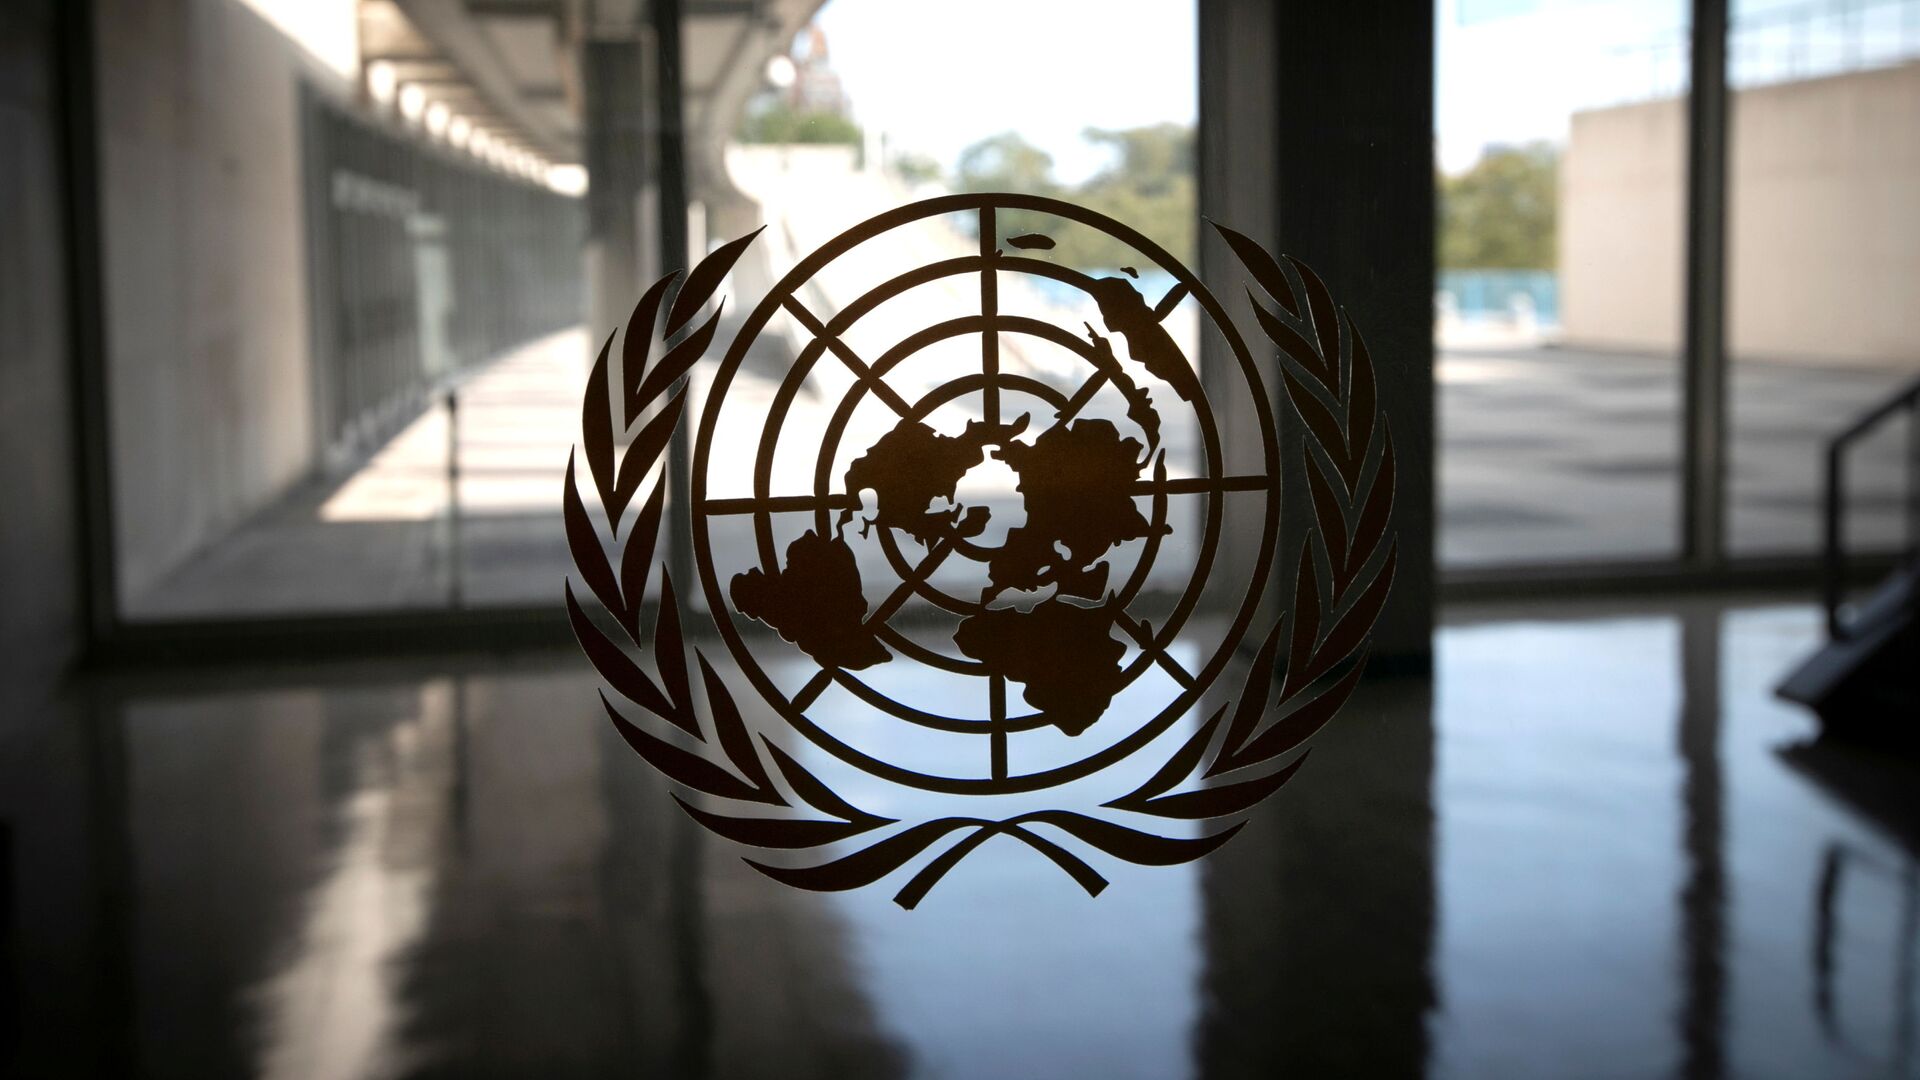 The United Nations logo is seen on a window in an empty hallway at United Nations headquarters during the 75th annual UN General Assembly high-level debate, which is being held mostly virtually due to the coronavirus disease (COVID-19) pandemic in New York, US, September 21, 2020 - Sputnik International, 1920, 13.09.2021